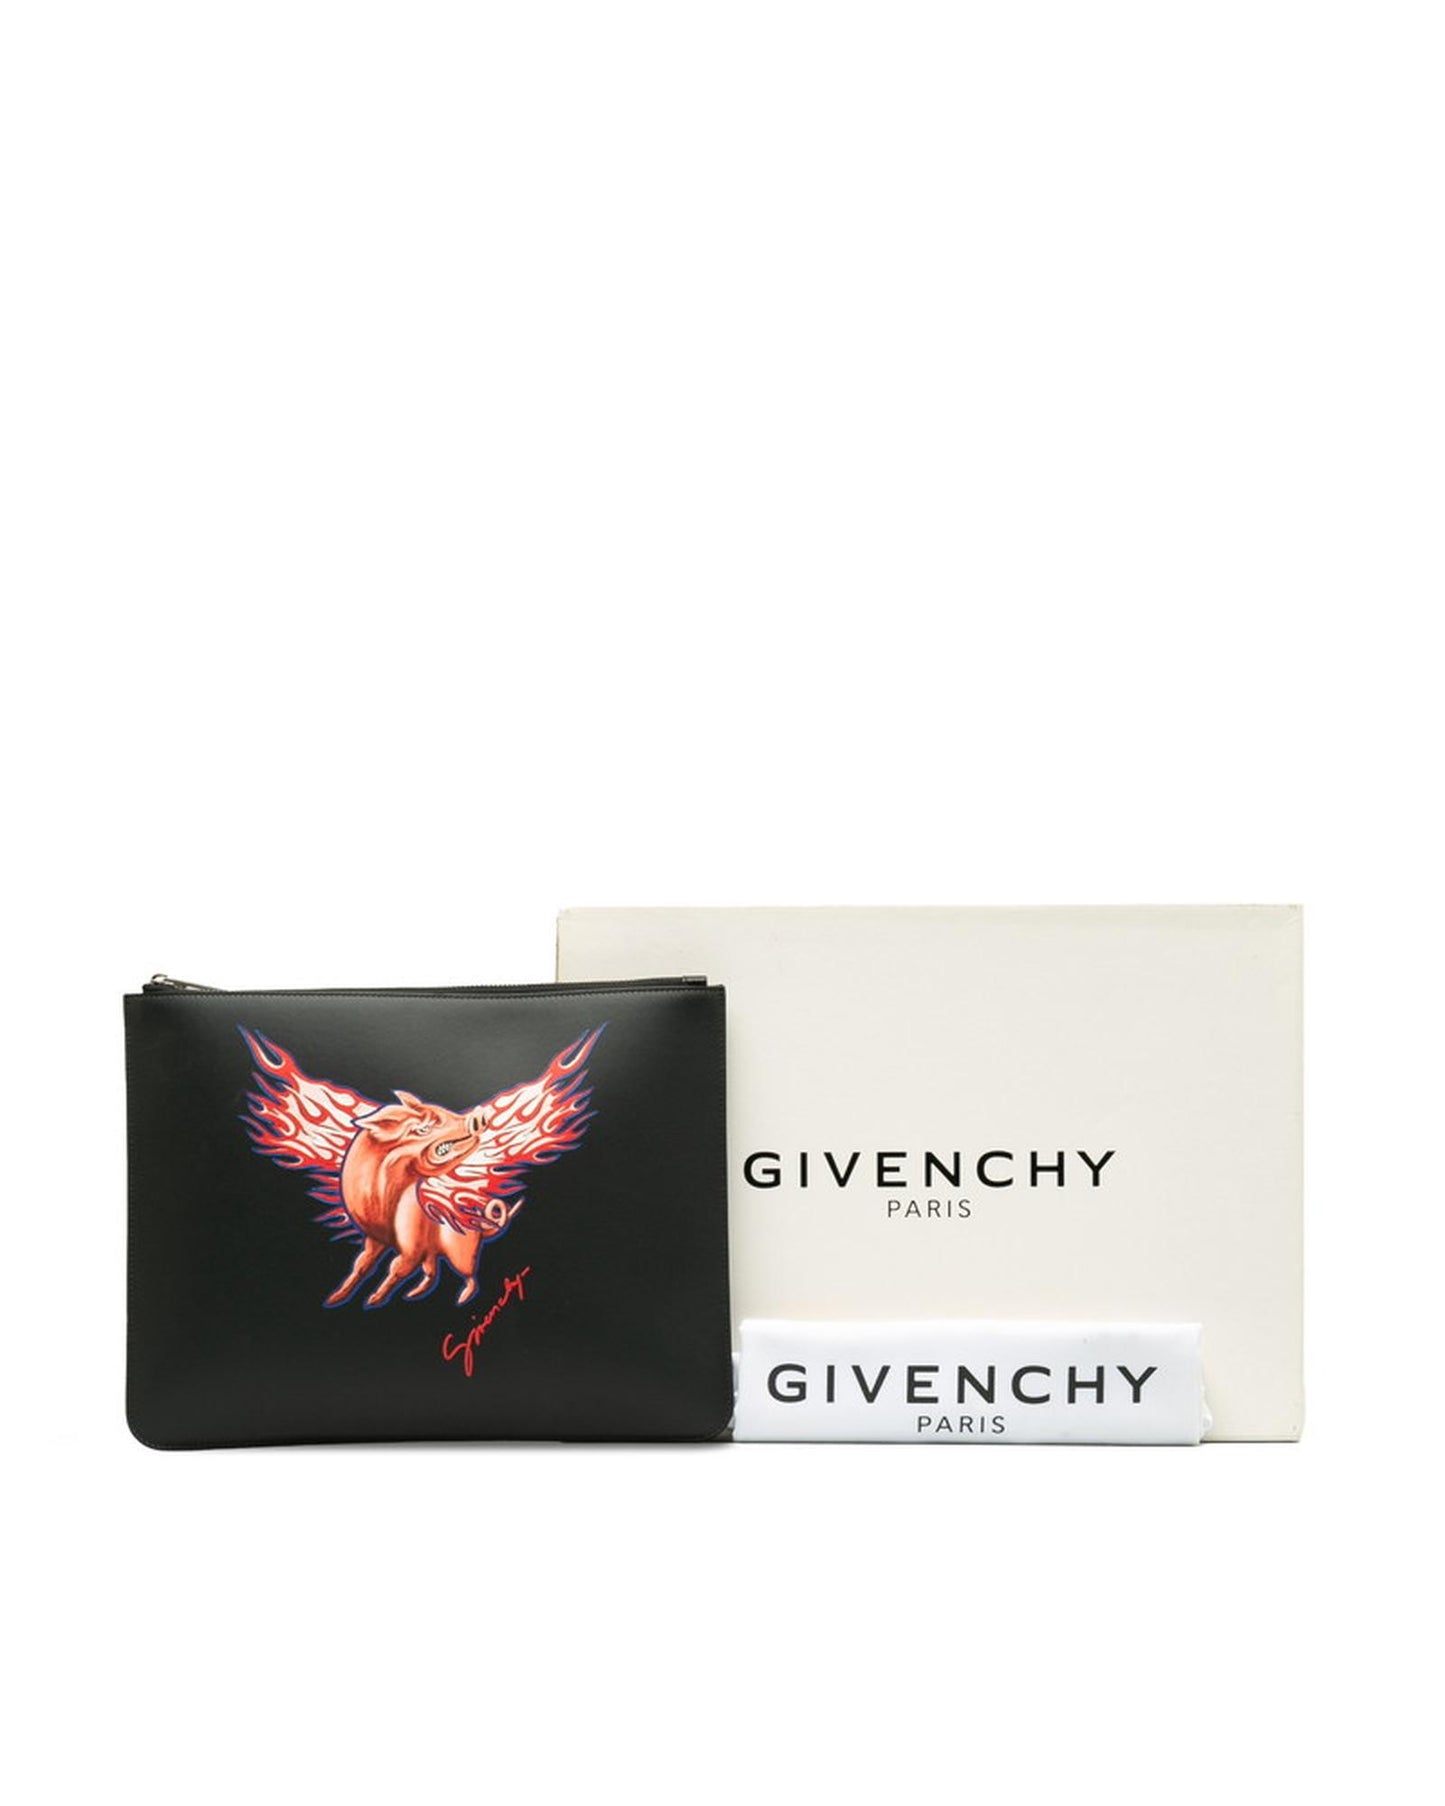 Givenchy Men's Givenchy Zodiac Collection Leather Clutch Bag in Black